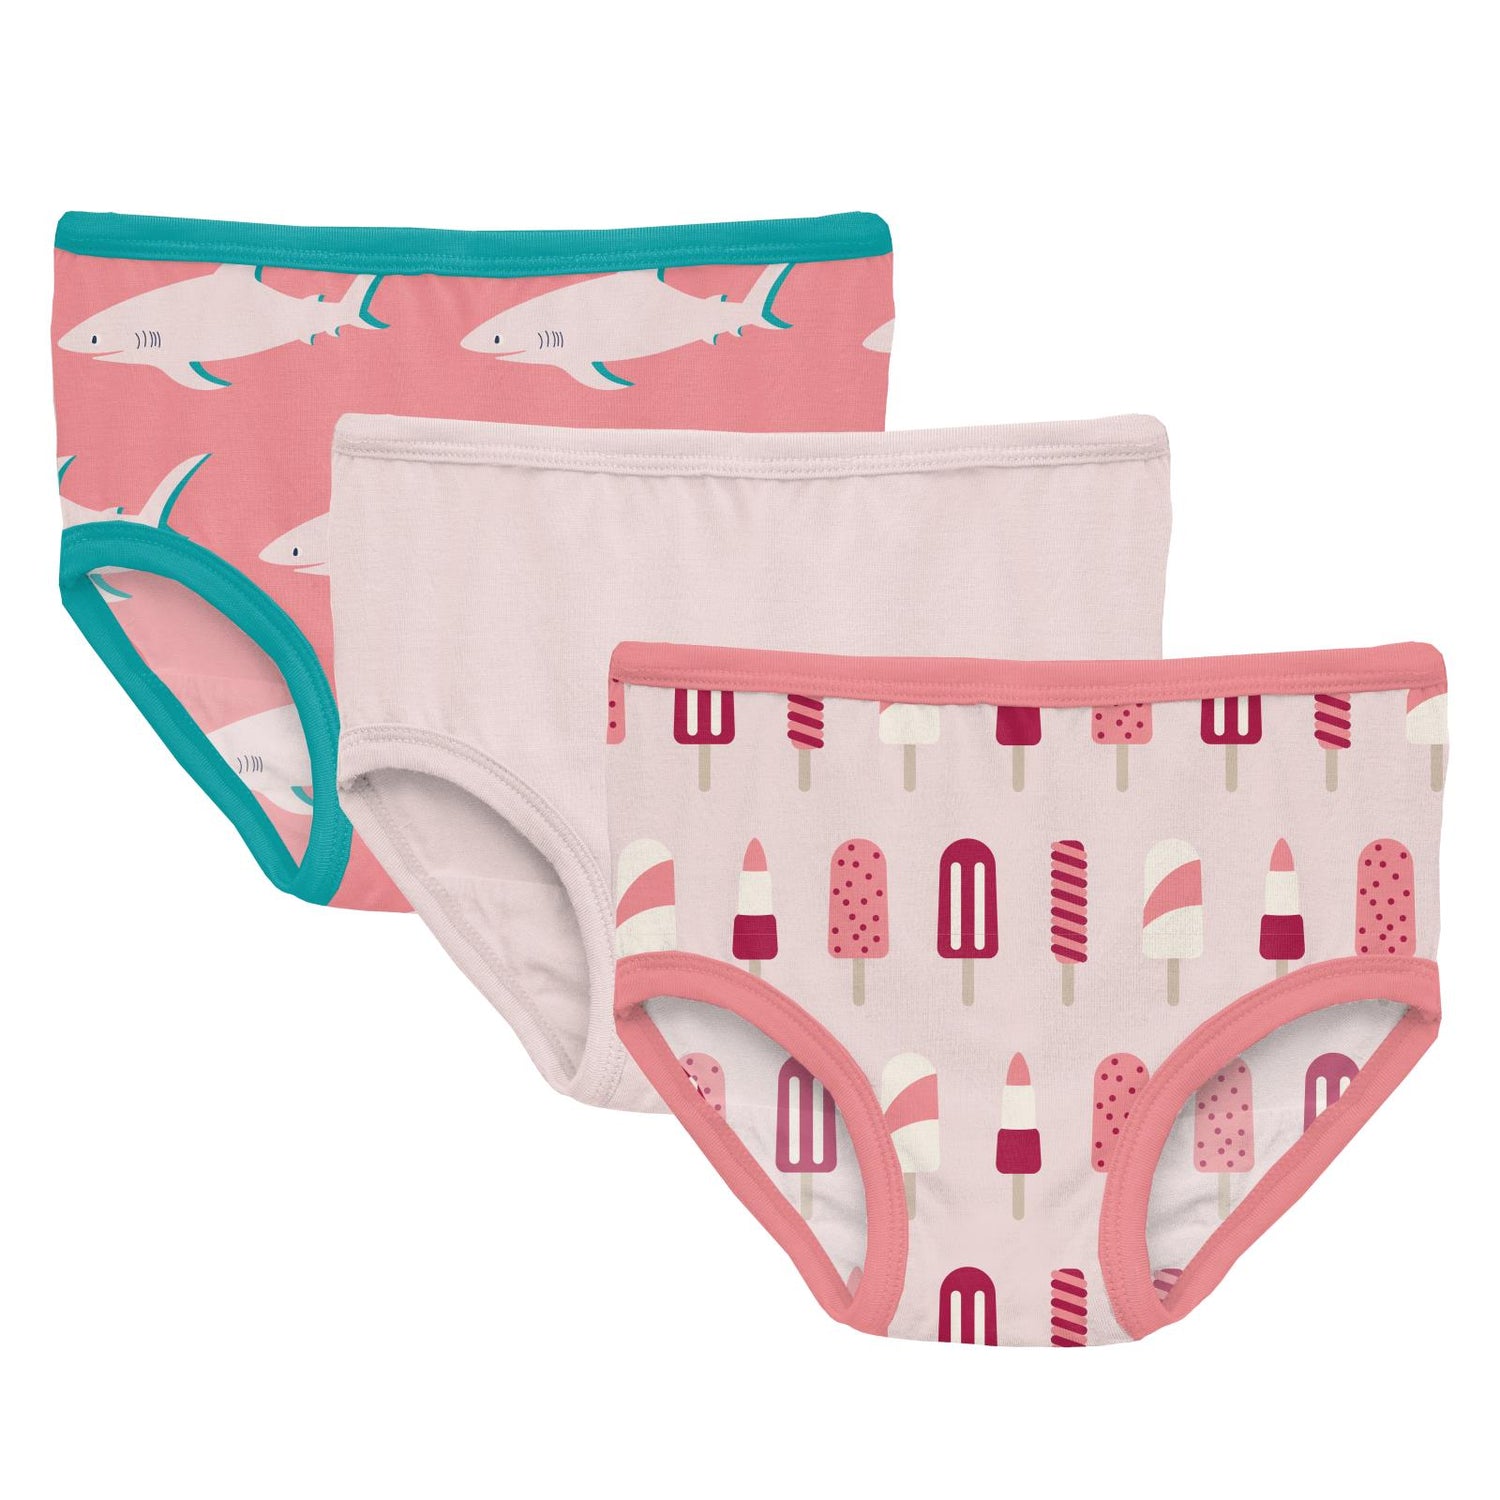 Print Underwear Set of 3 in Strawberry Sharky, Macaroon and Macaroon Popsicles